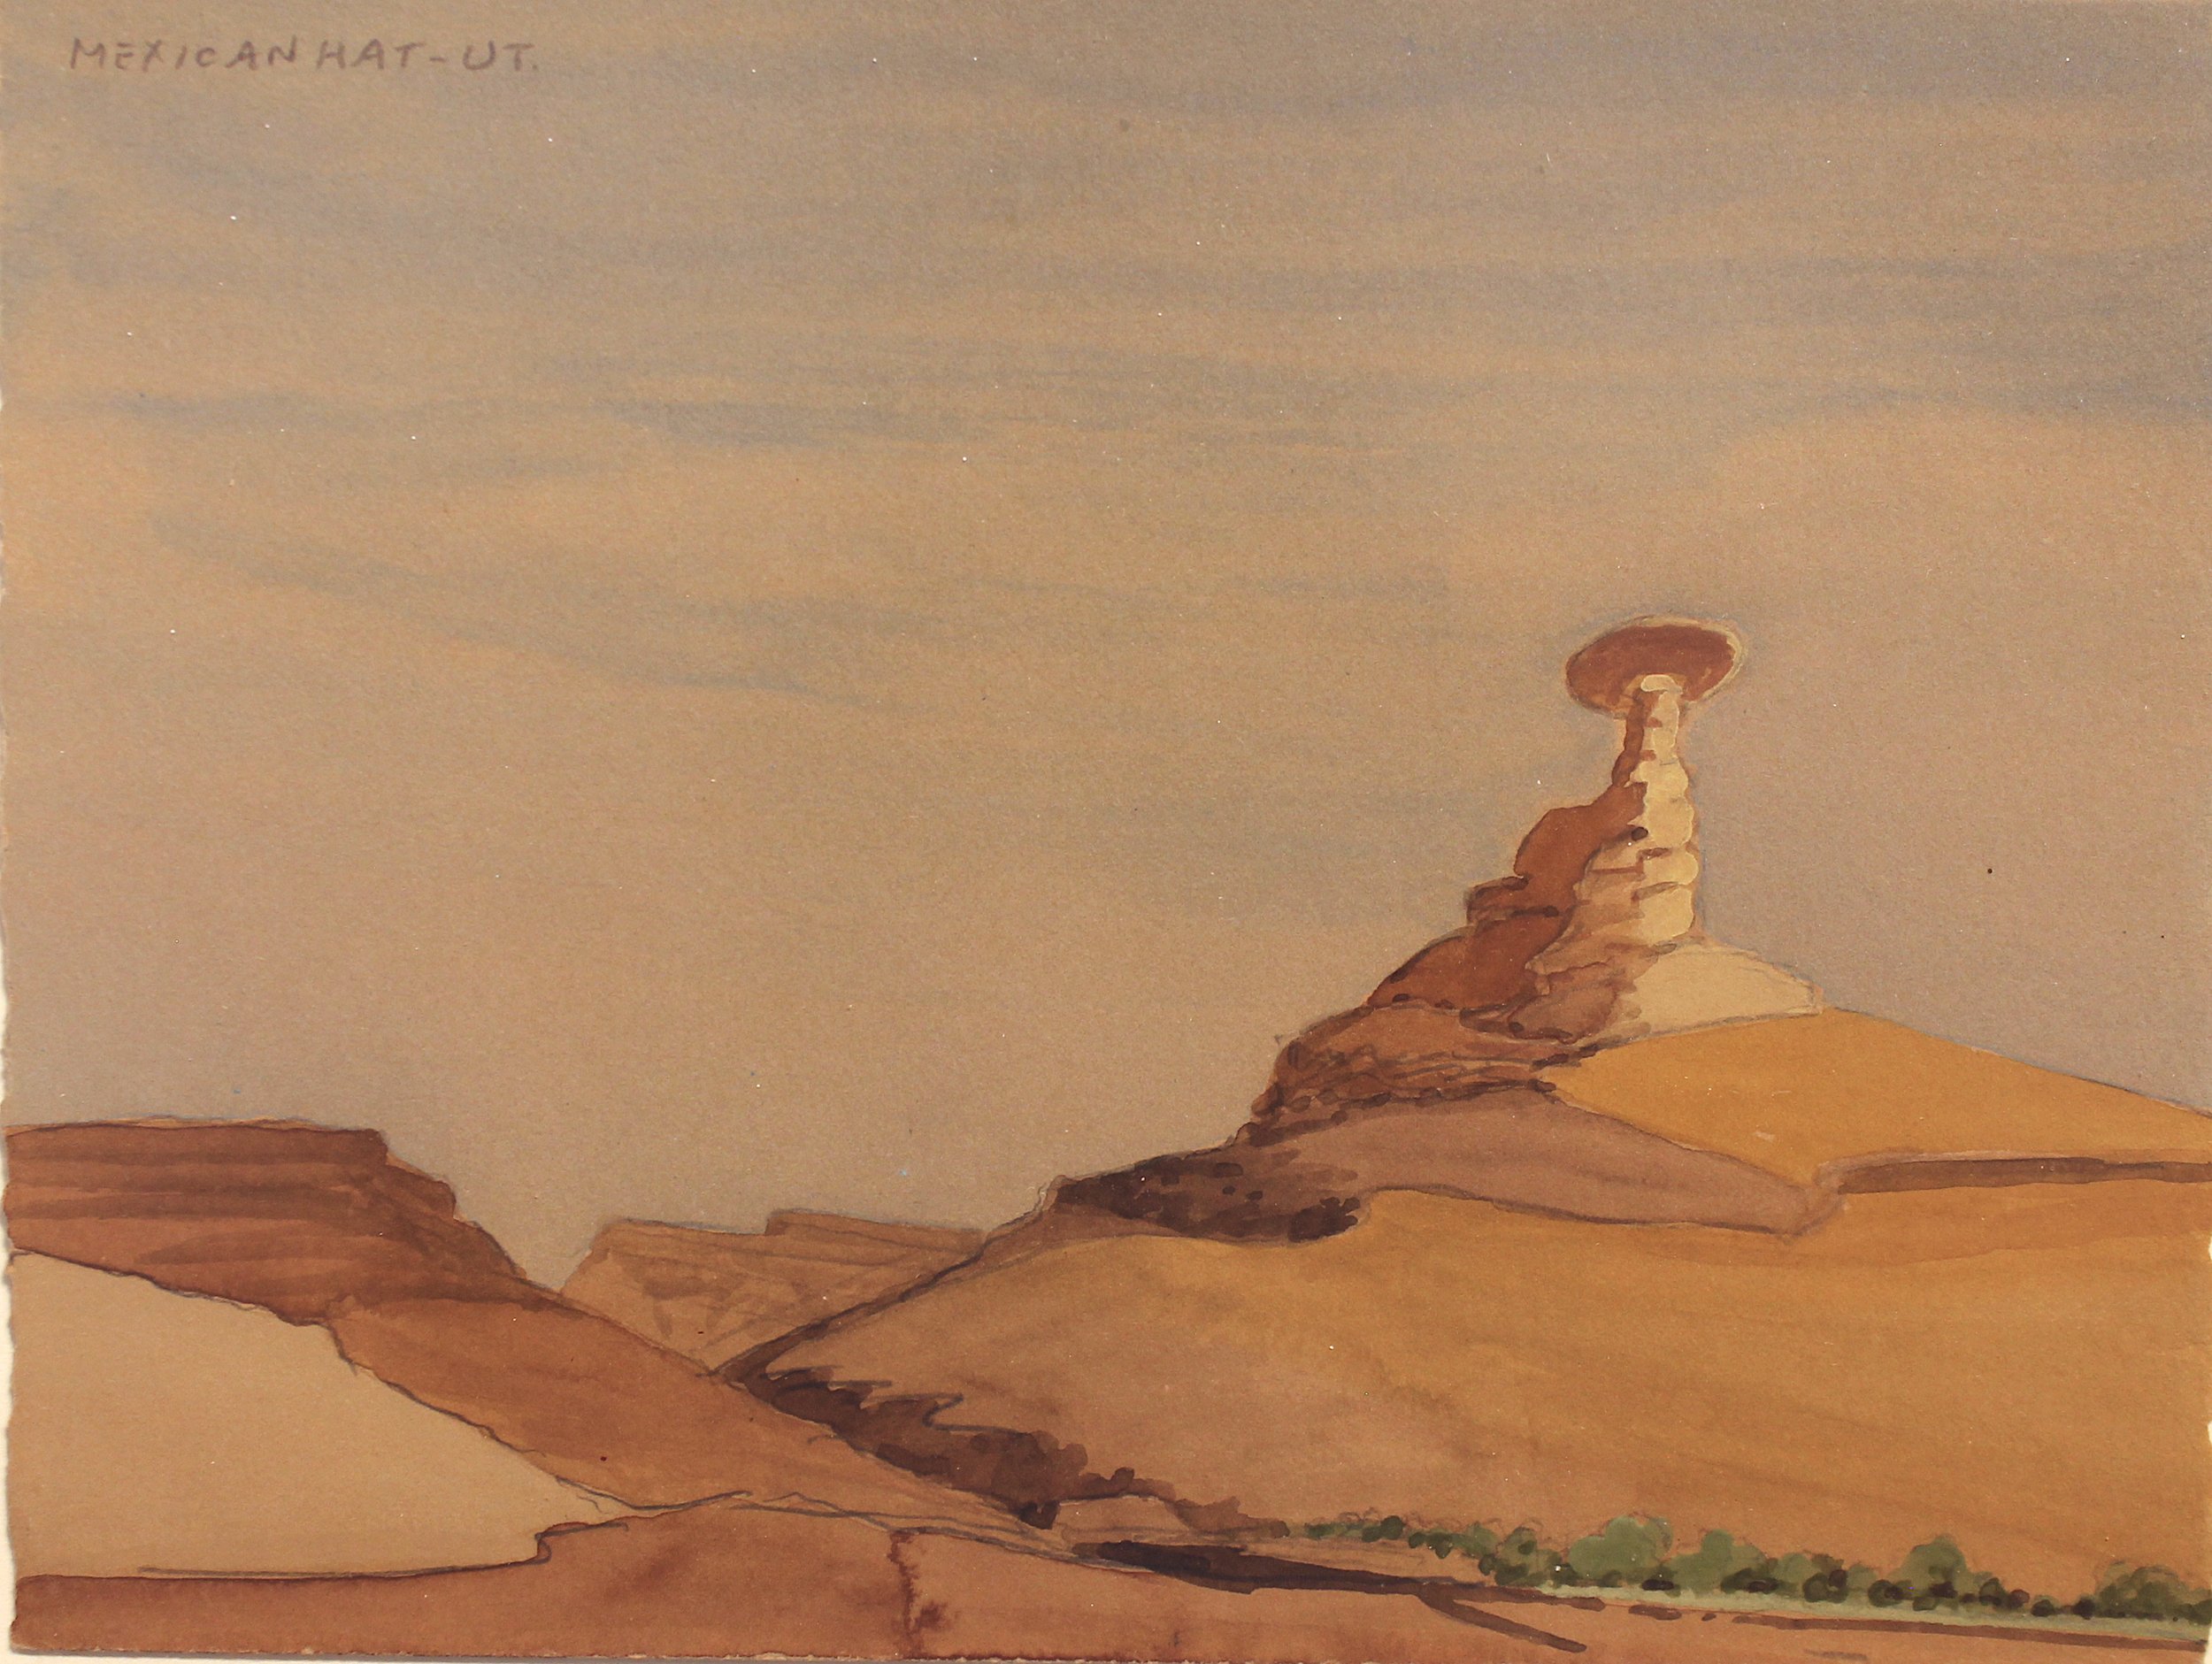 Watercolors of the Colorado: Mexican Hat